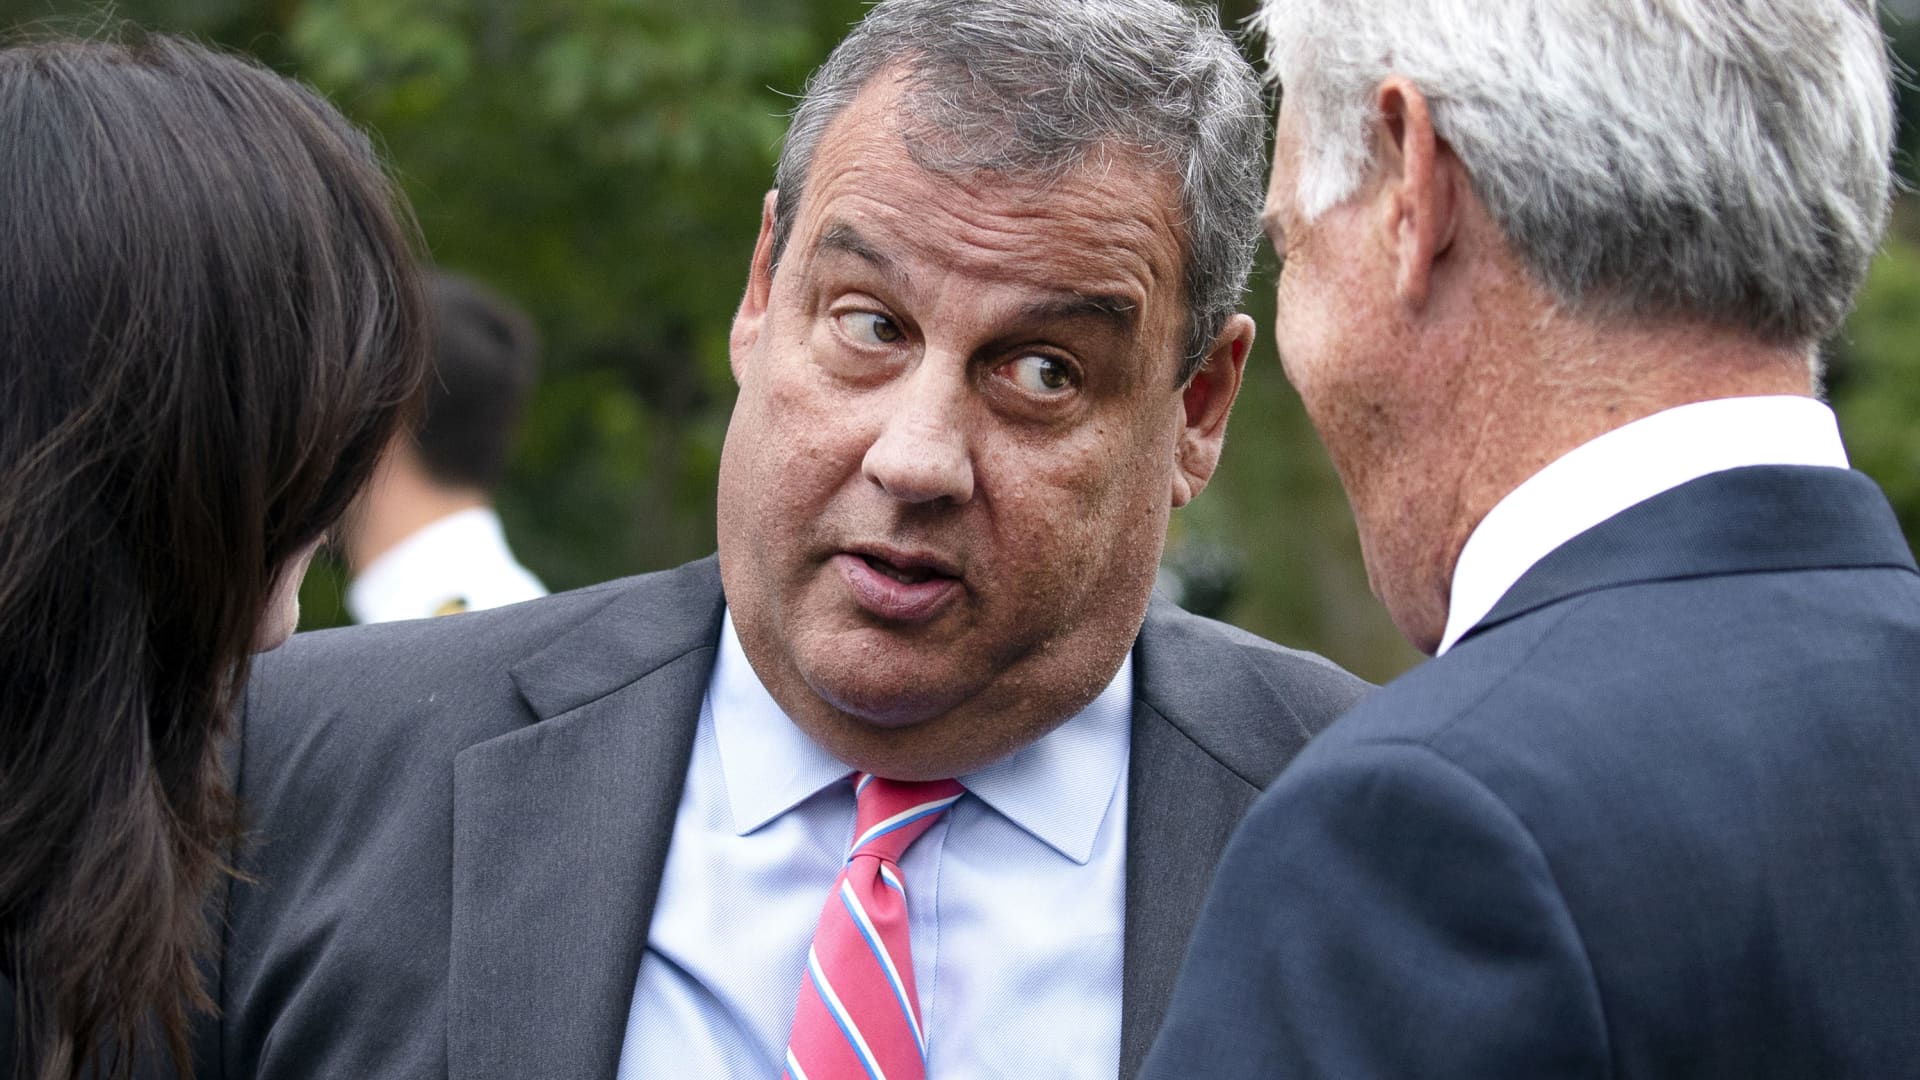 Chris Christie, former Governor of New Jersey, center, speaks with attendees following the announcement of U.S. President Donald Trump's nominee for associate justice of the U.S. Supreme Court during a ceremony in the Rose Garden of the White House in Washington, D.C., on Saturday, Sept. 26, 2020.